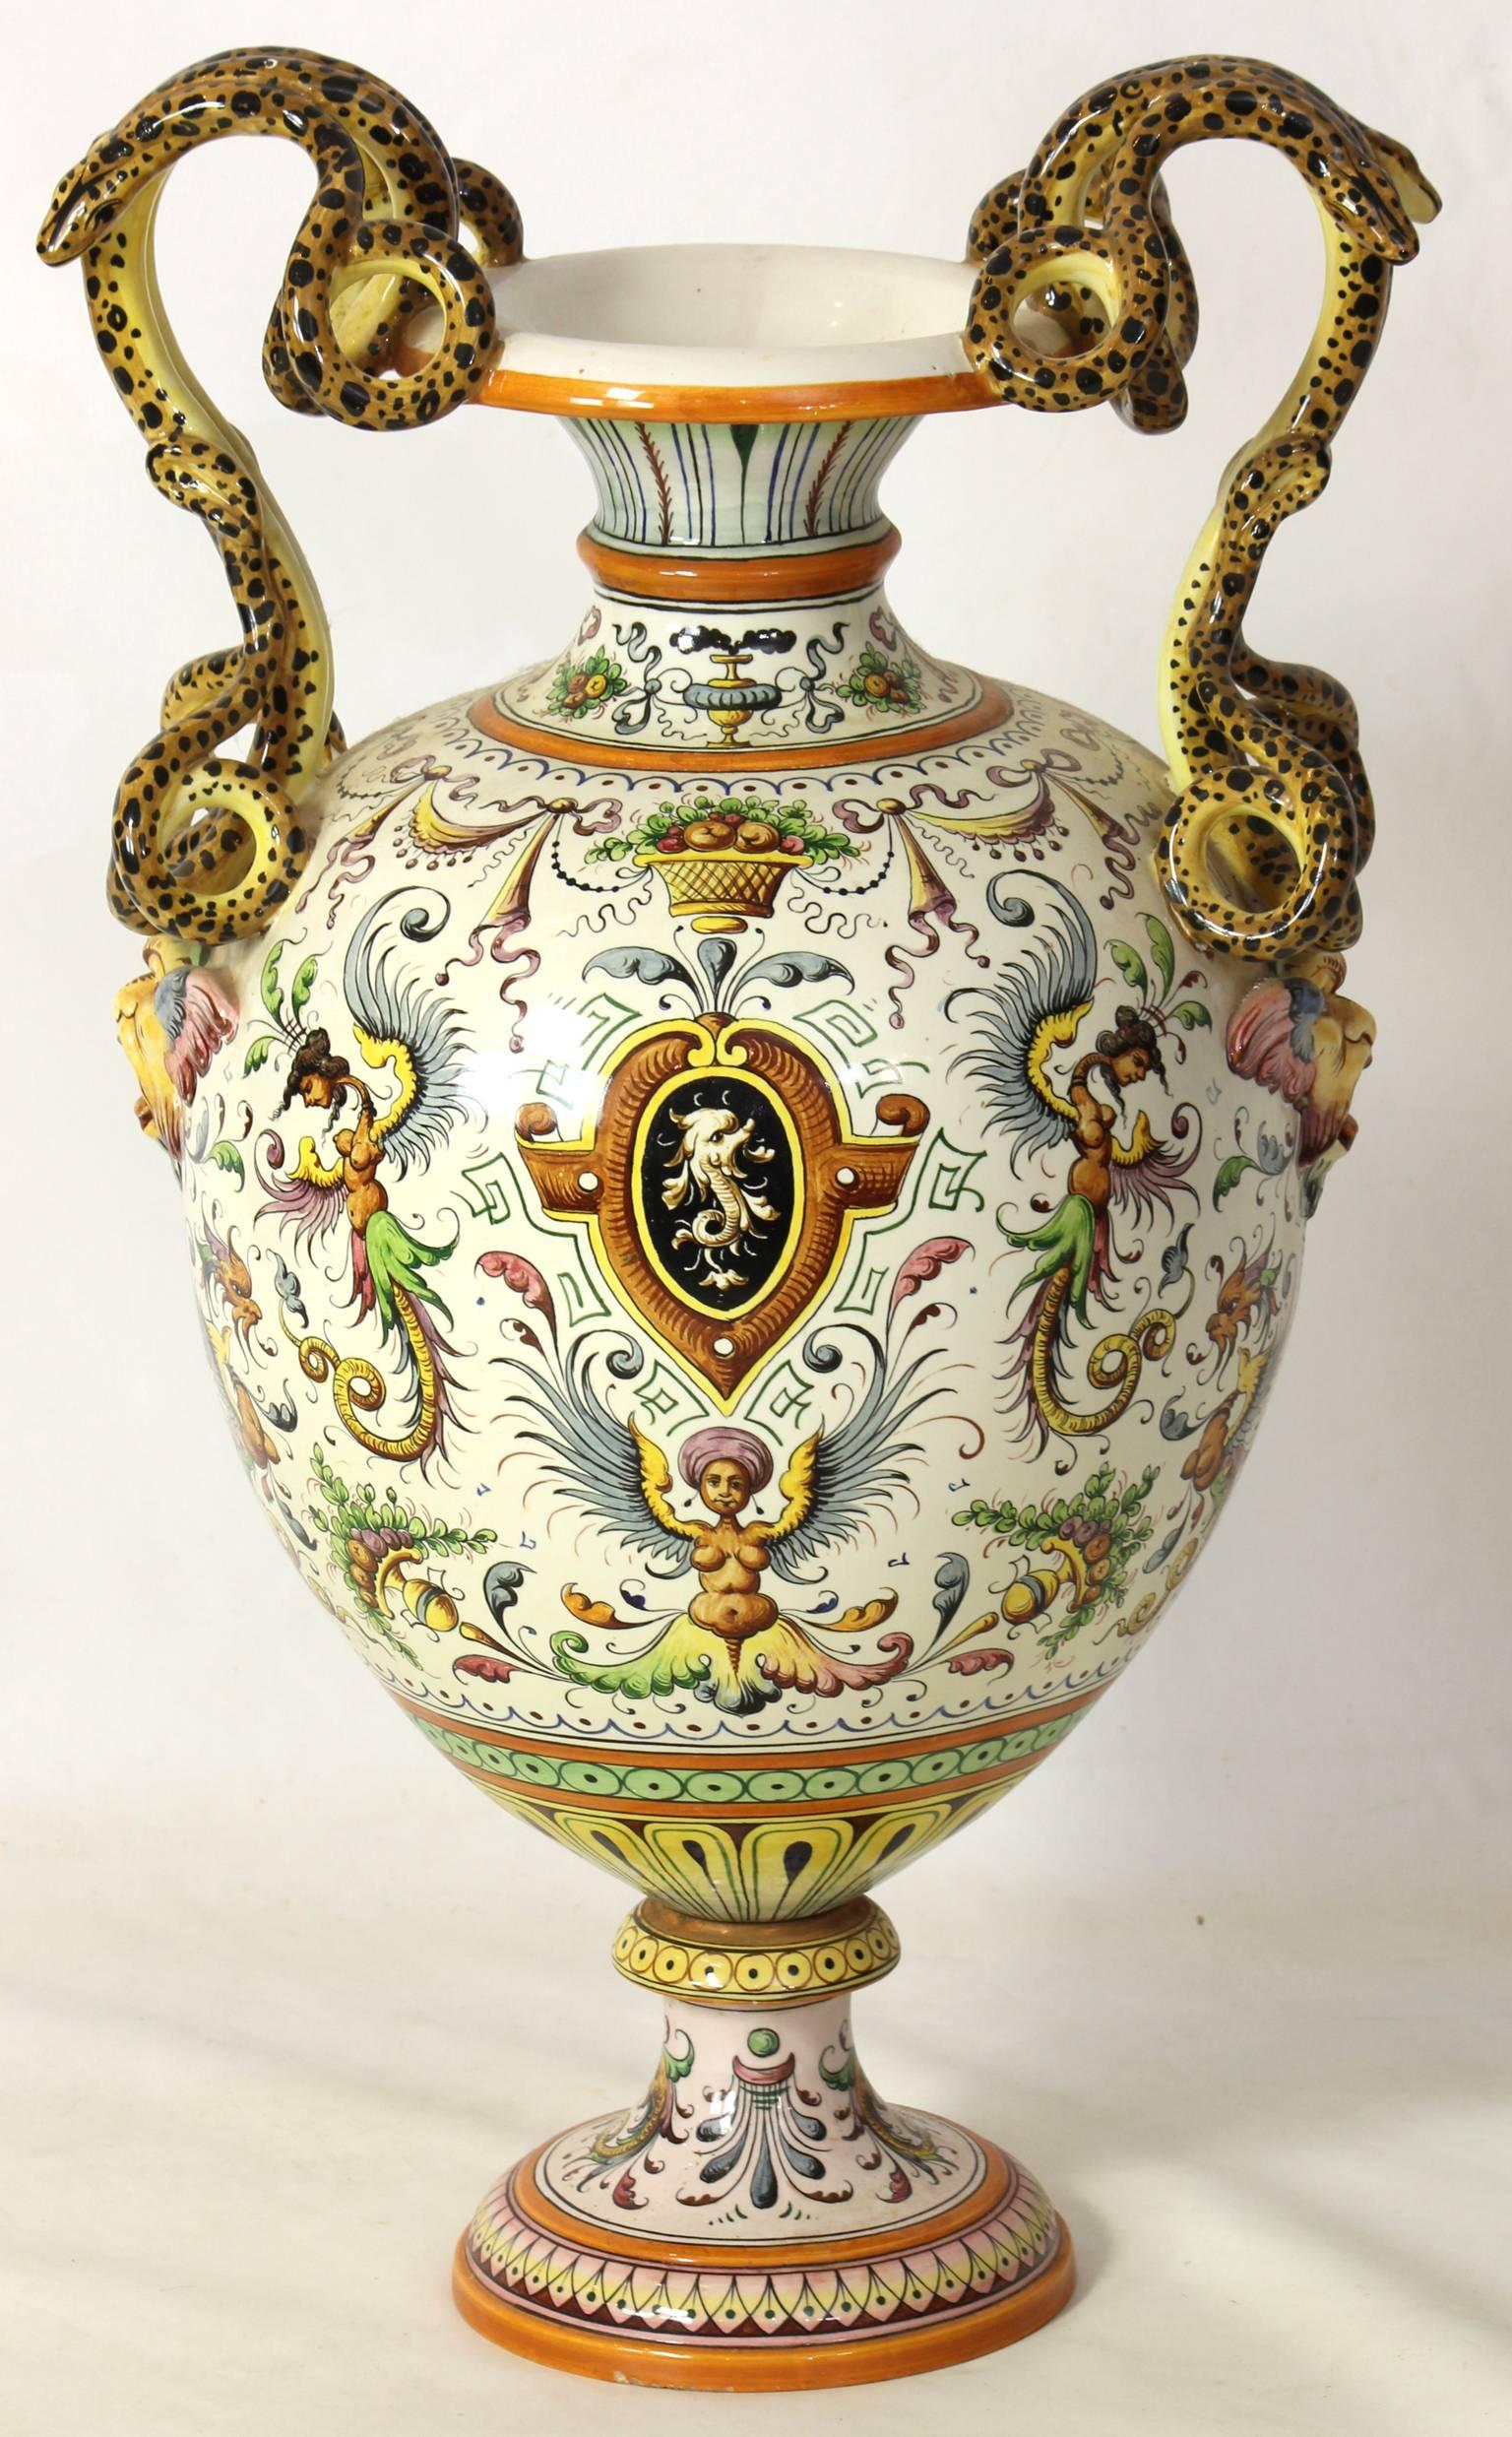 A large early 20th century baluster form Italian Majolica urn with extensive paint decoration and wonderful serpent handles.